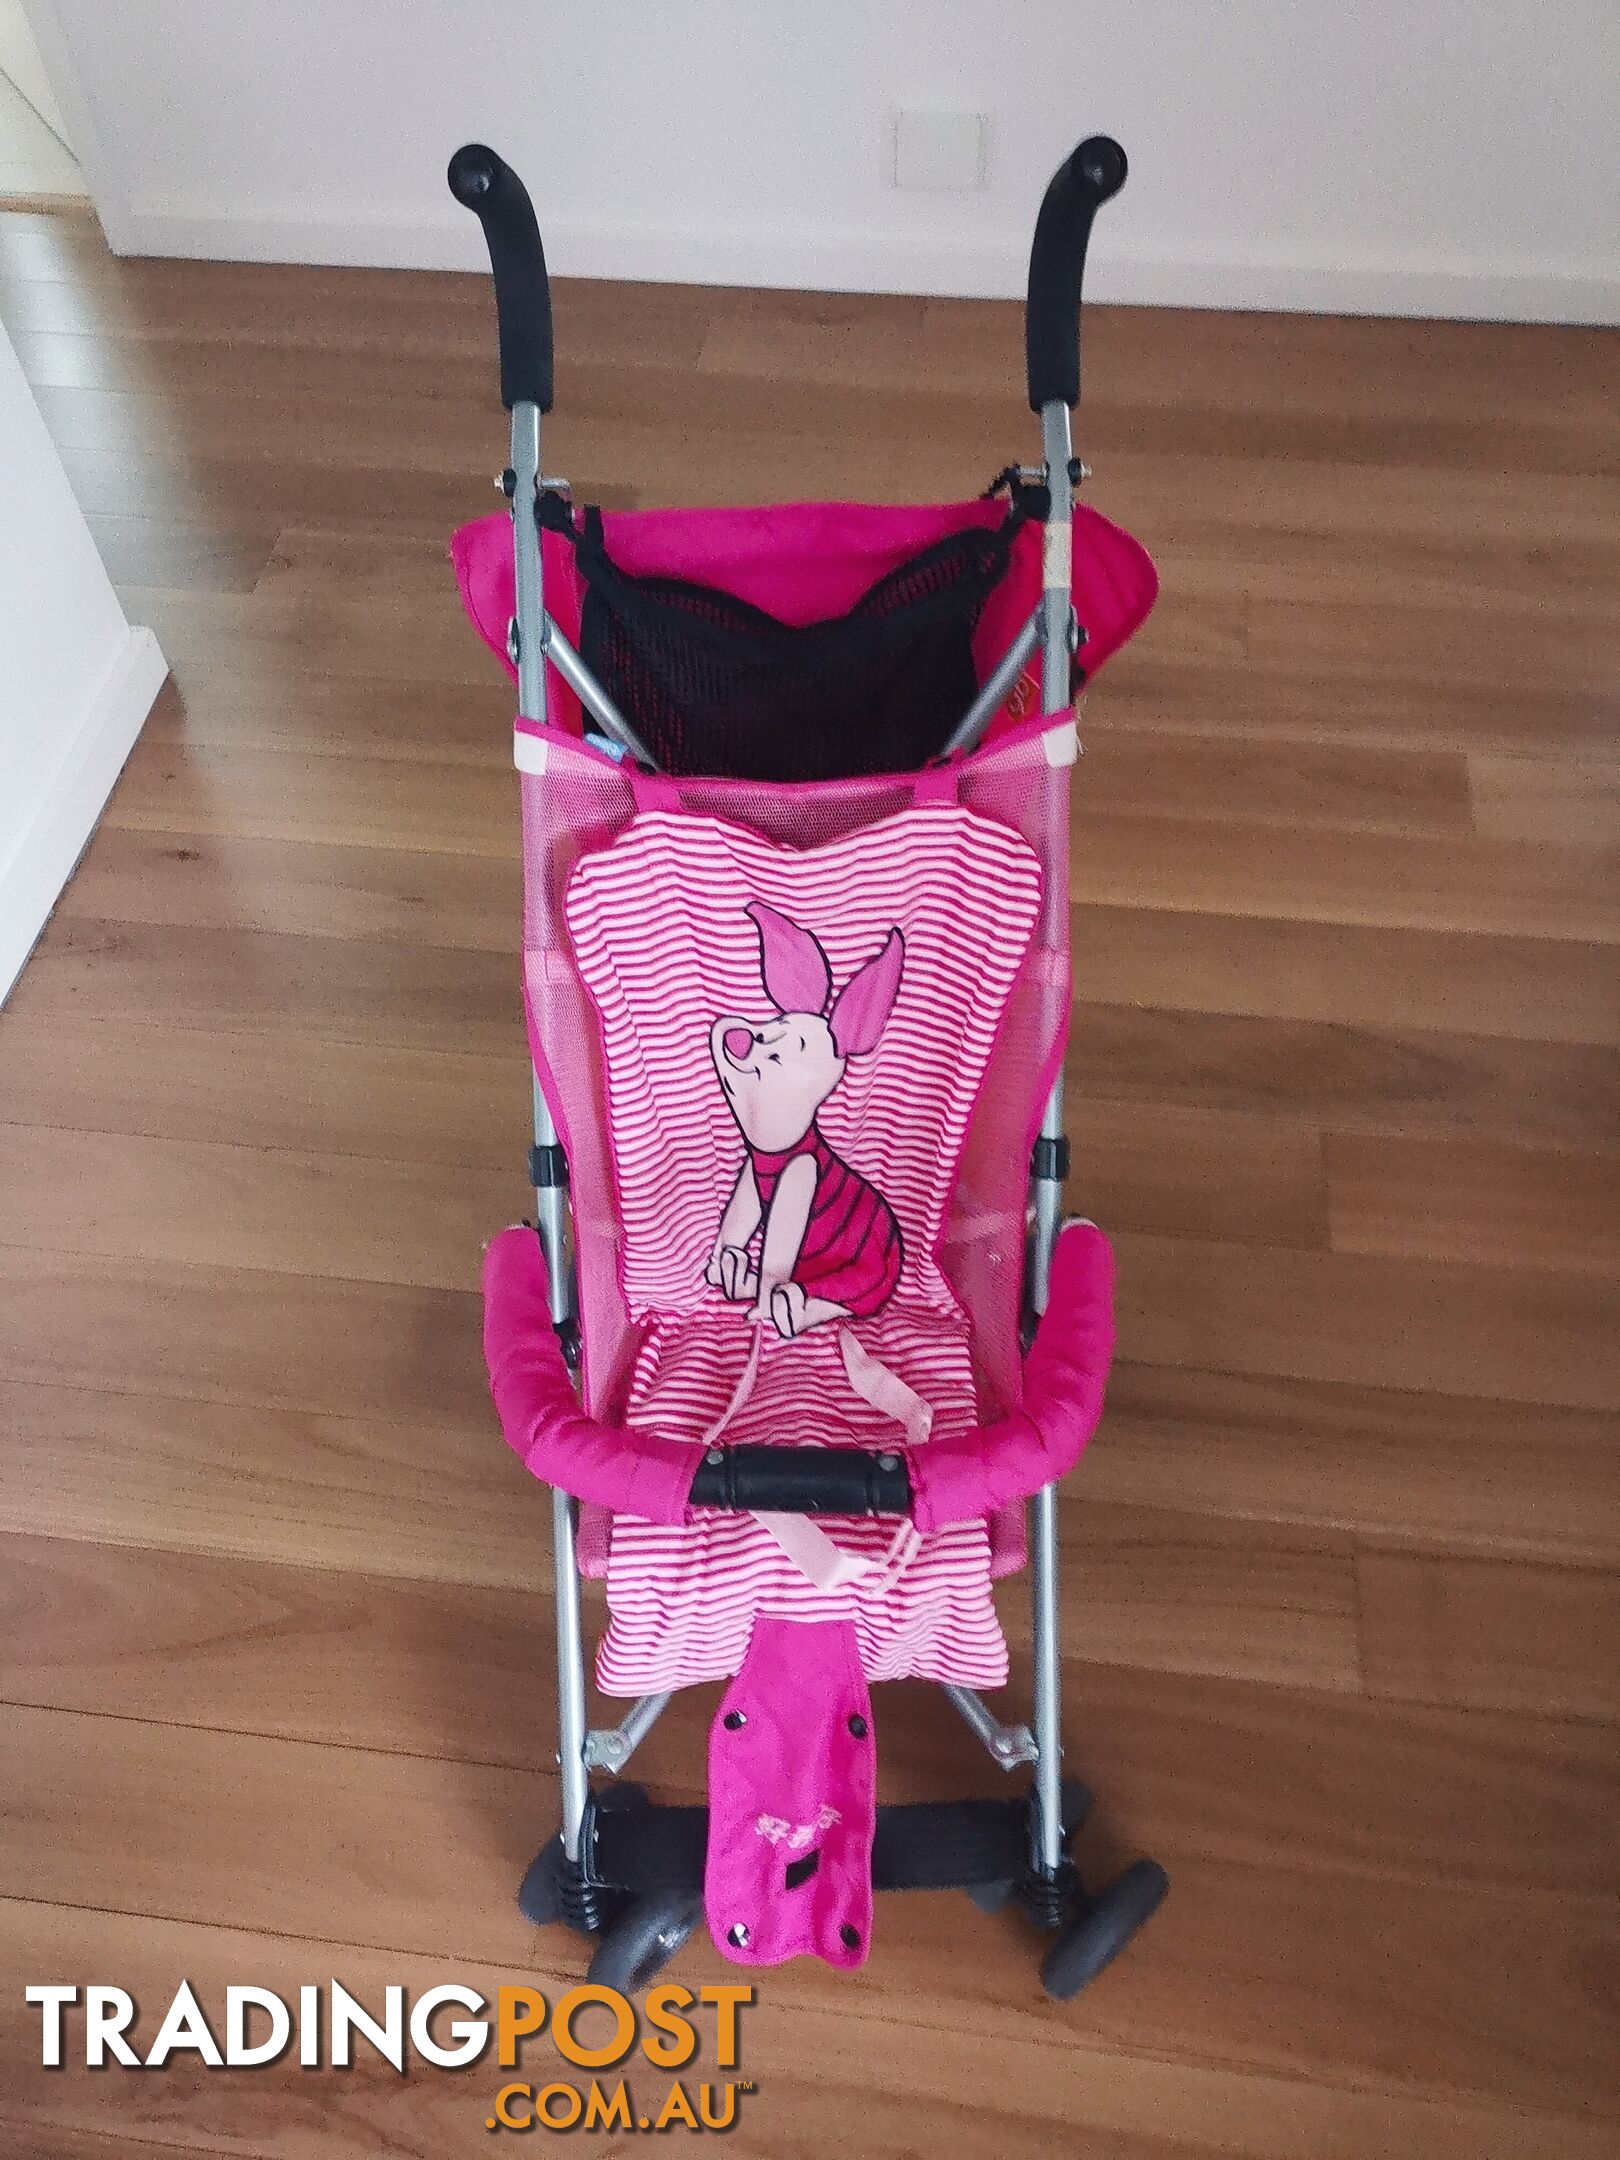 The baby stroller, weighing only 4.7 kilograms, is suitable for carrying onto airplanes.